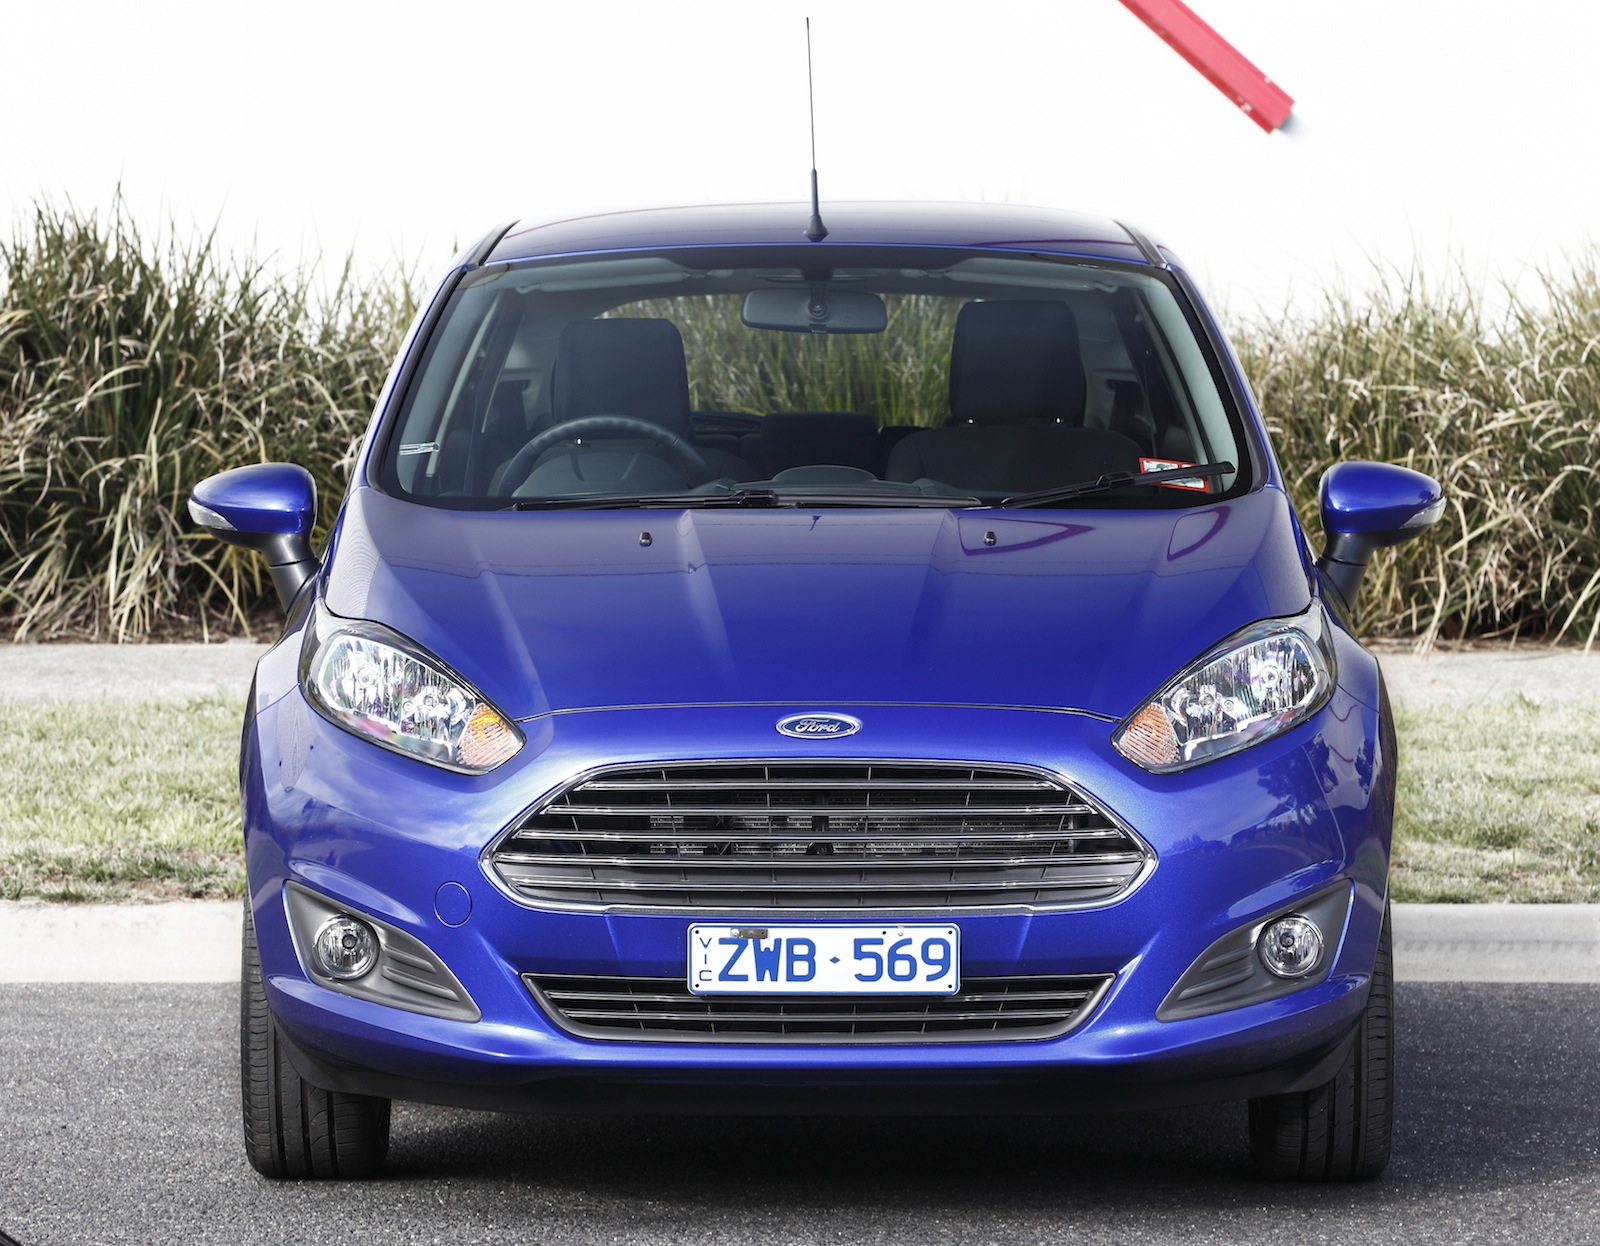 2013 Ford Fiesta Review | CarAdvice